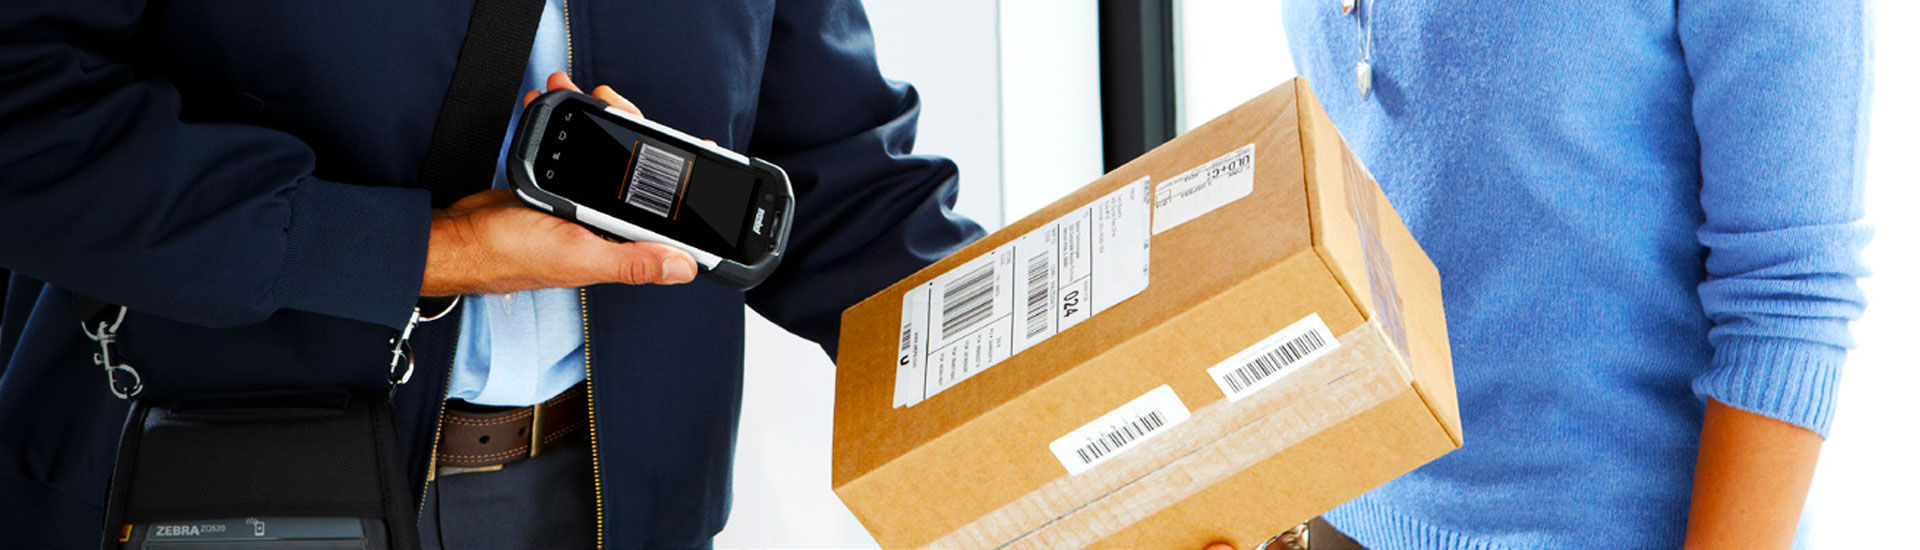 worker using last mile delivery software scans package before giving it to client